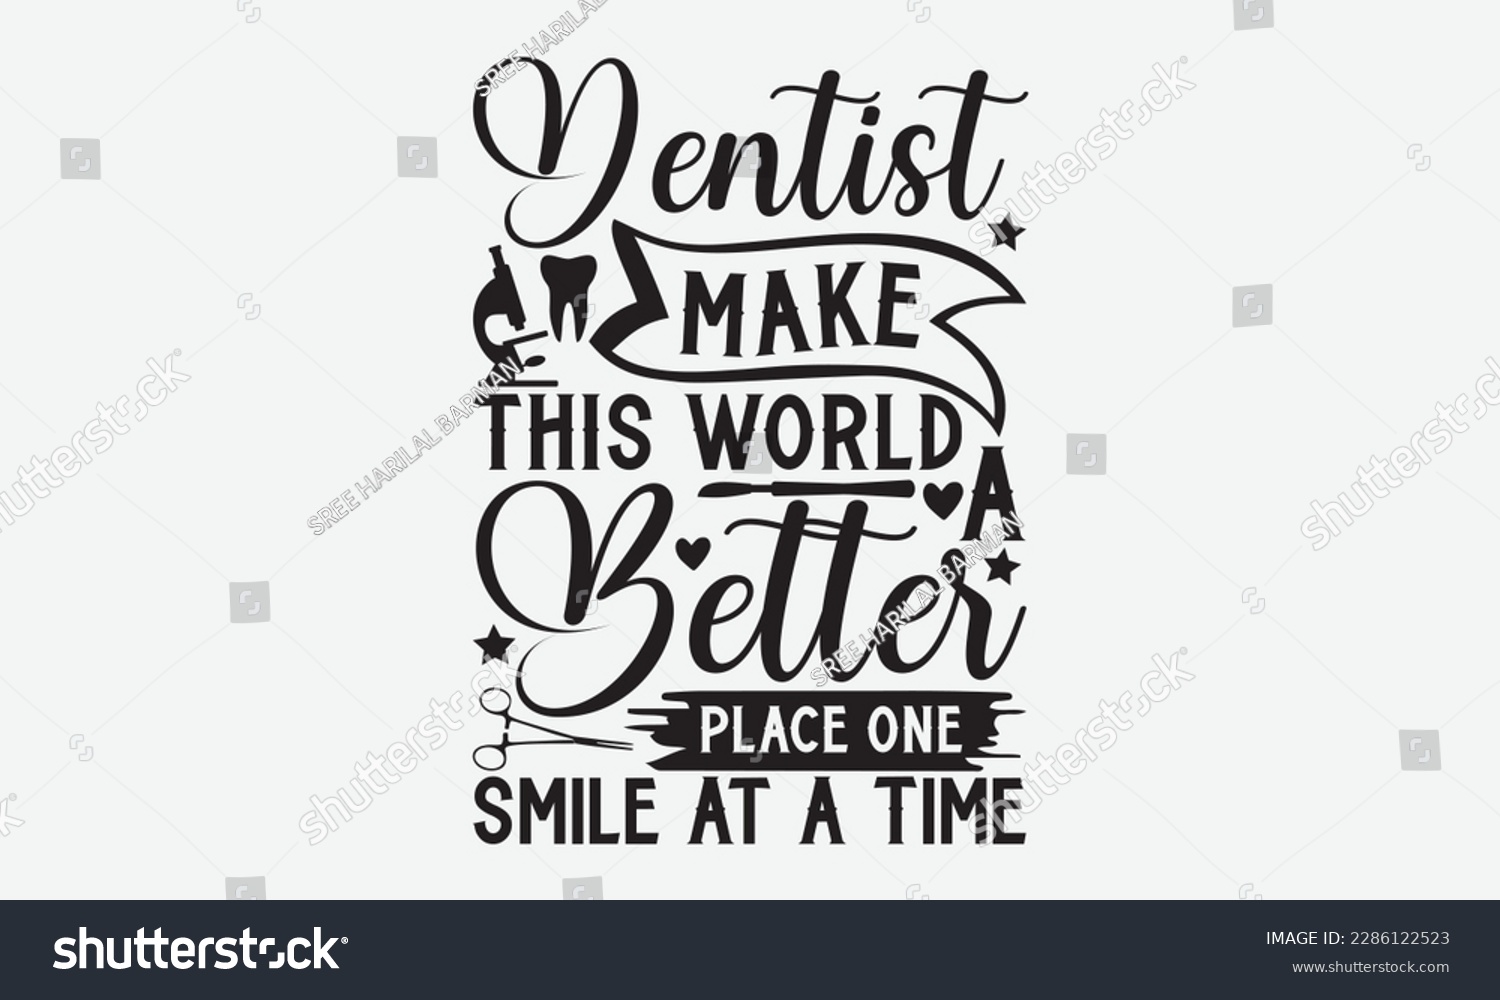 SVG of Dentist Make This World A Better Place One Smile At A Time - Dentist T-shirt Design, Conceptual handwritten phrase craft SVG hand-lettered, Handmade calligraphy vector illustration, template, greeting svg